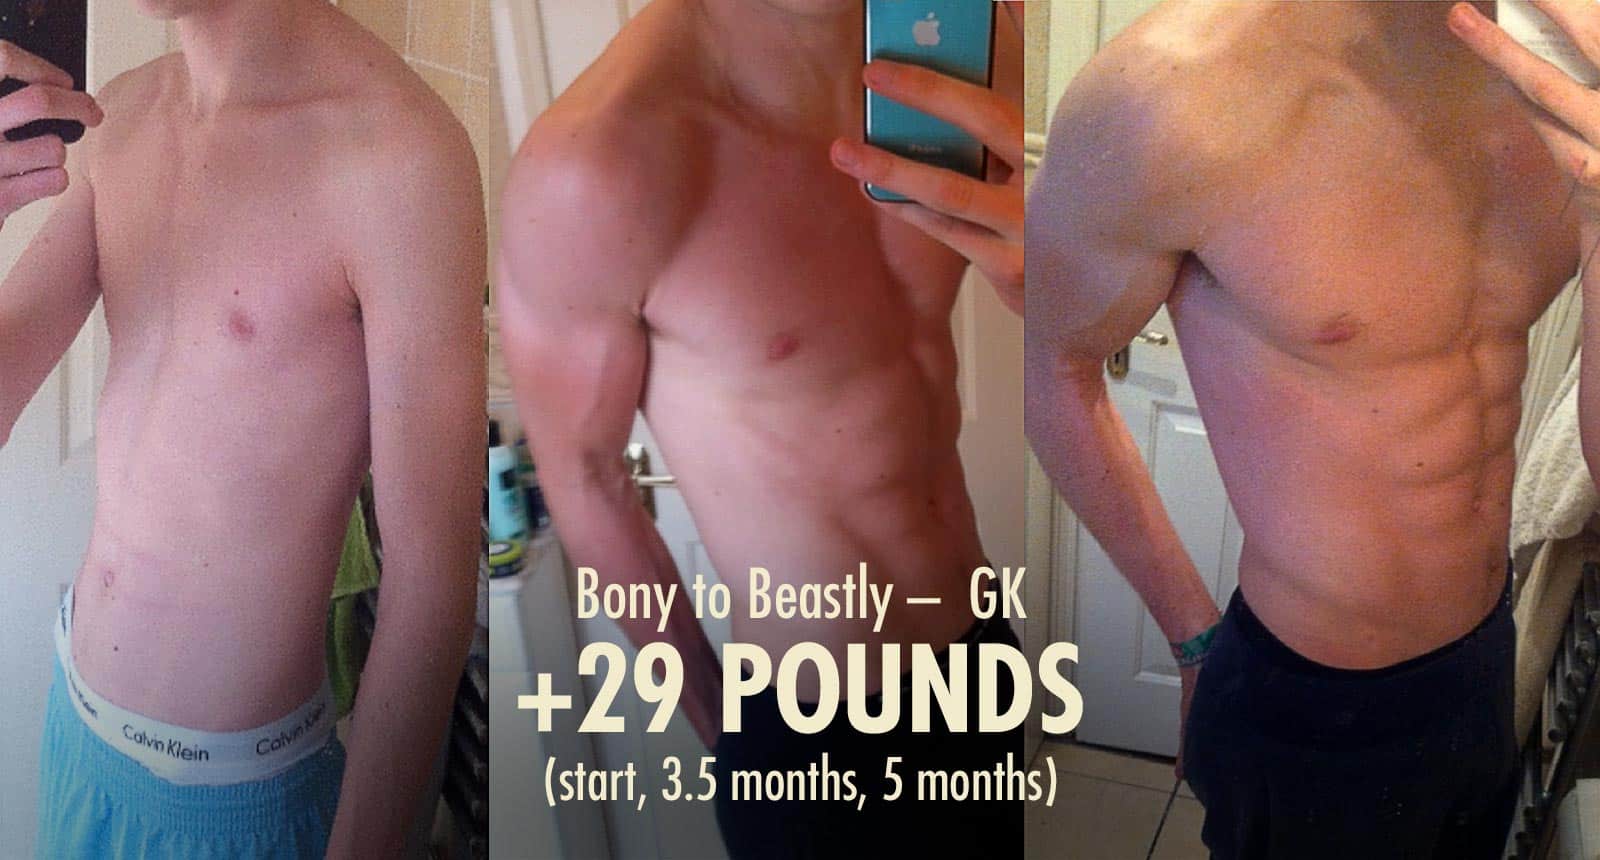 Before and after results of a skinny guy who bulked up using a 3-day full-body workout program.